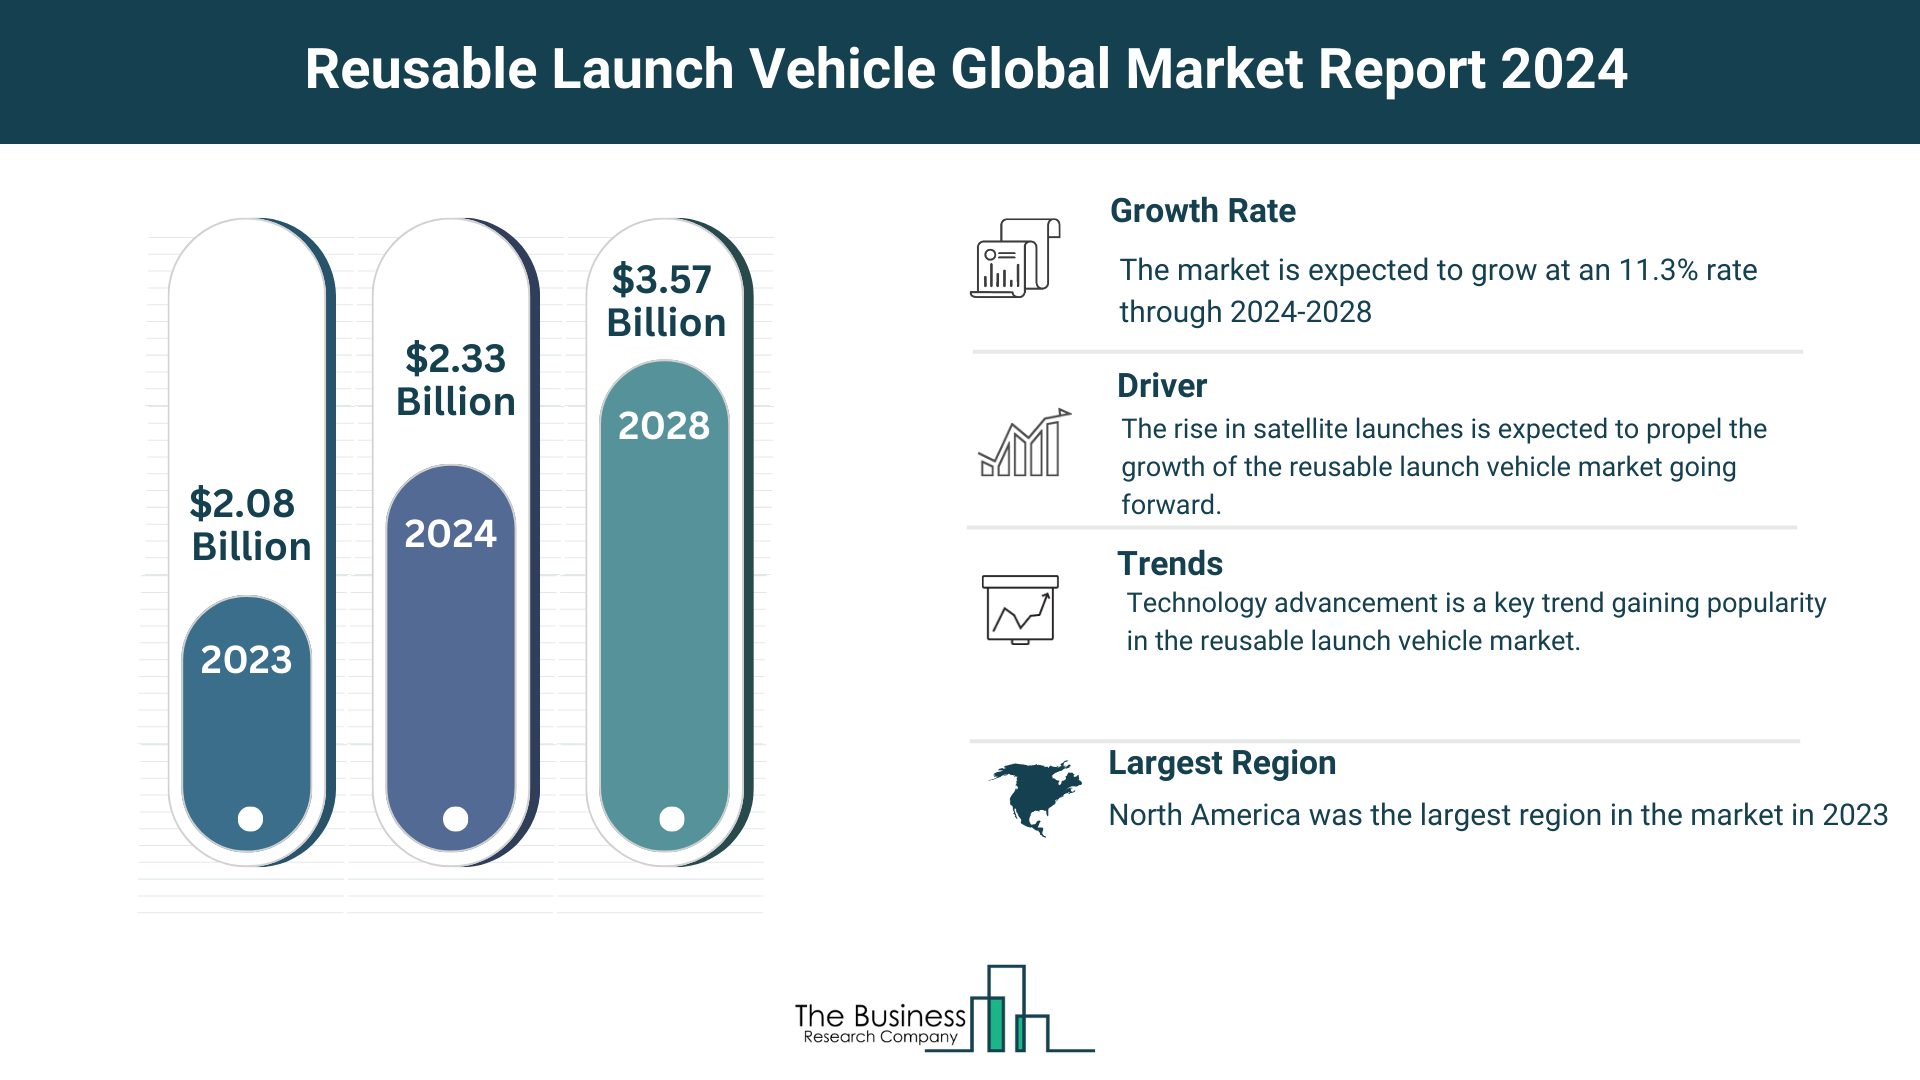 Global Reusable Launch Vehicle Market Analysis: Size, Drivers, Trends, Opportunities And Strategies